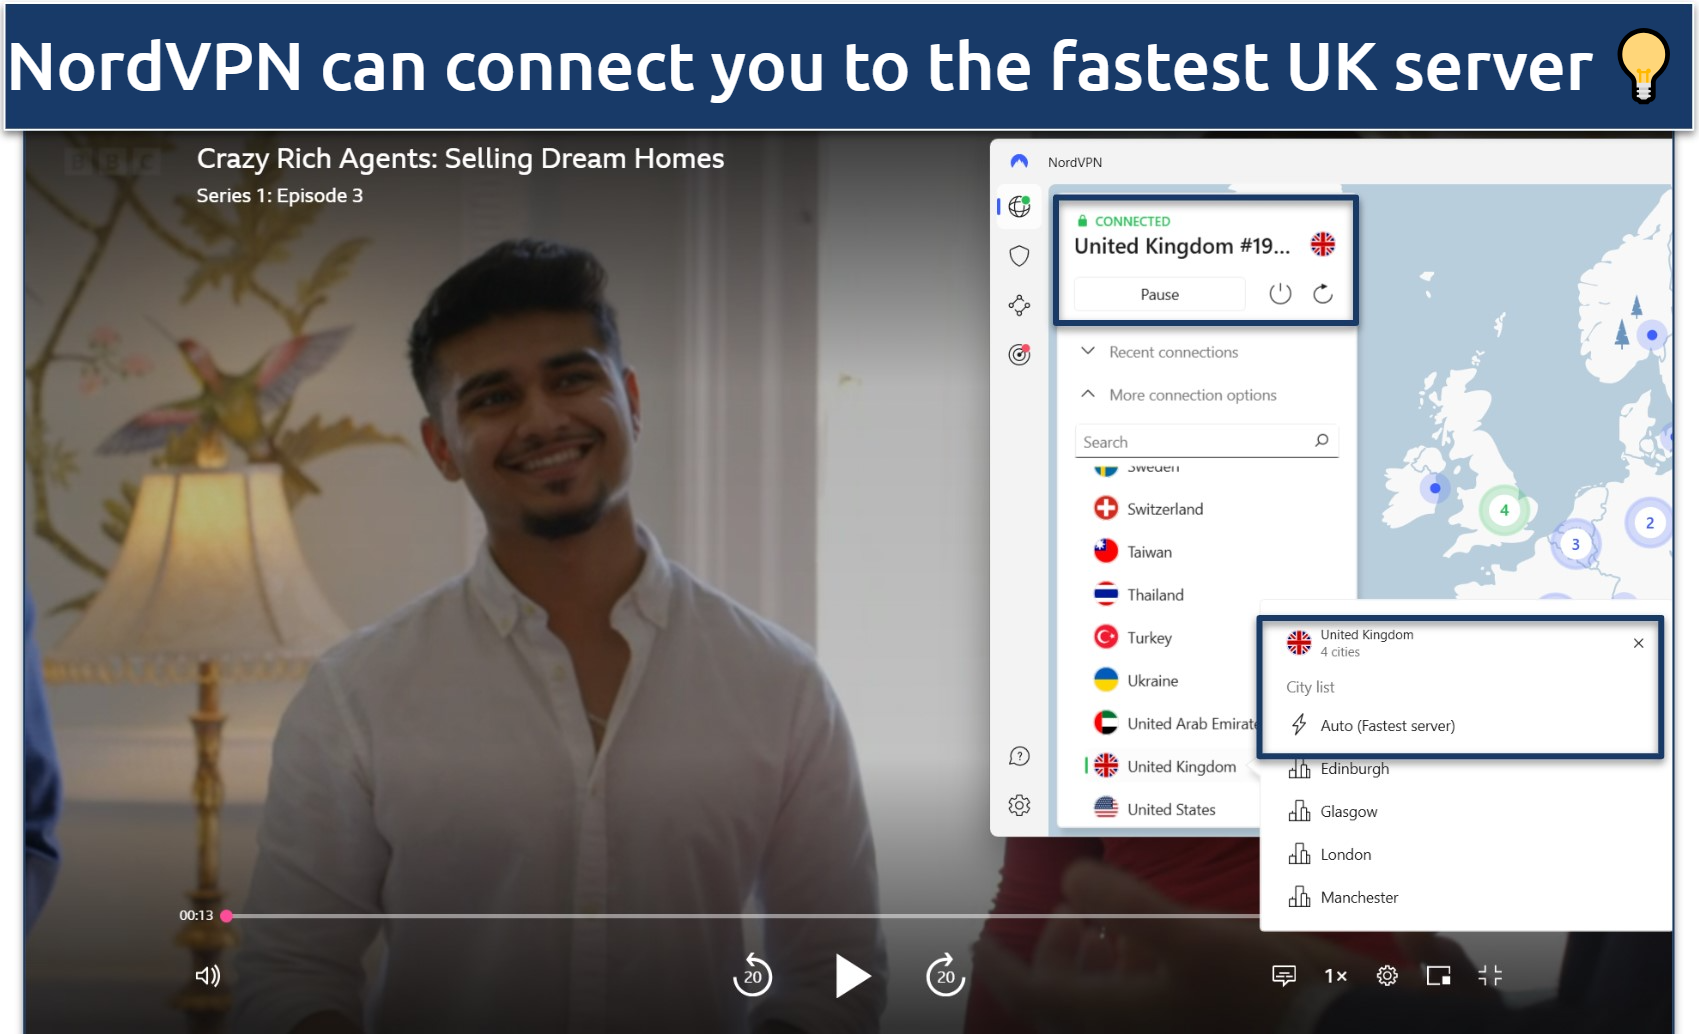 A screenshot of streaming Crazy Rich Agents on BBC iPlayer while connected to NordVPN's Auto (Fastest Server) in the UK.